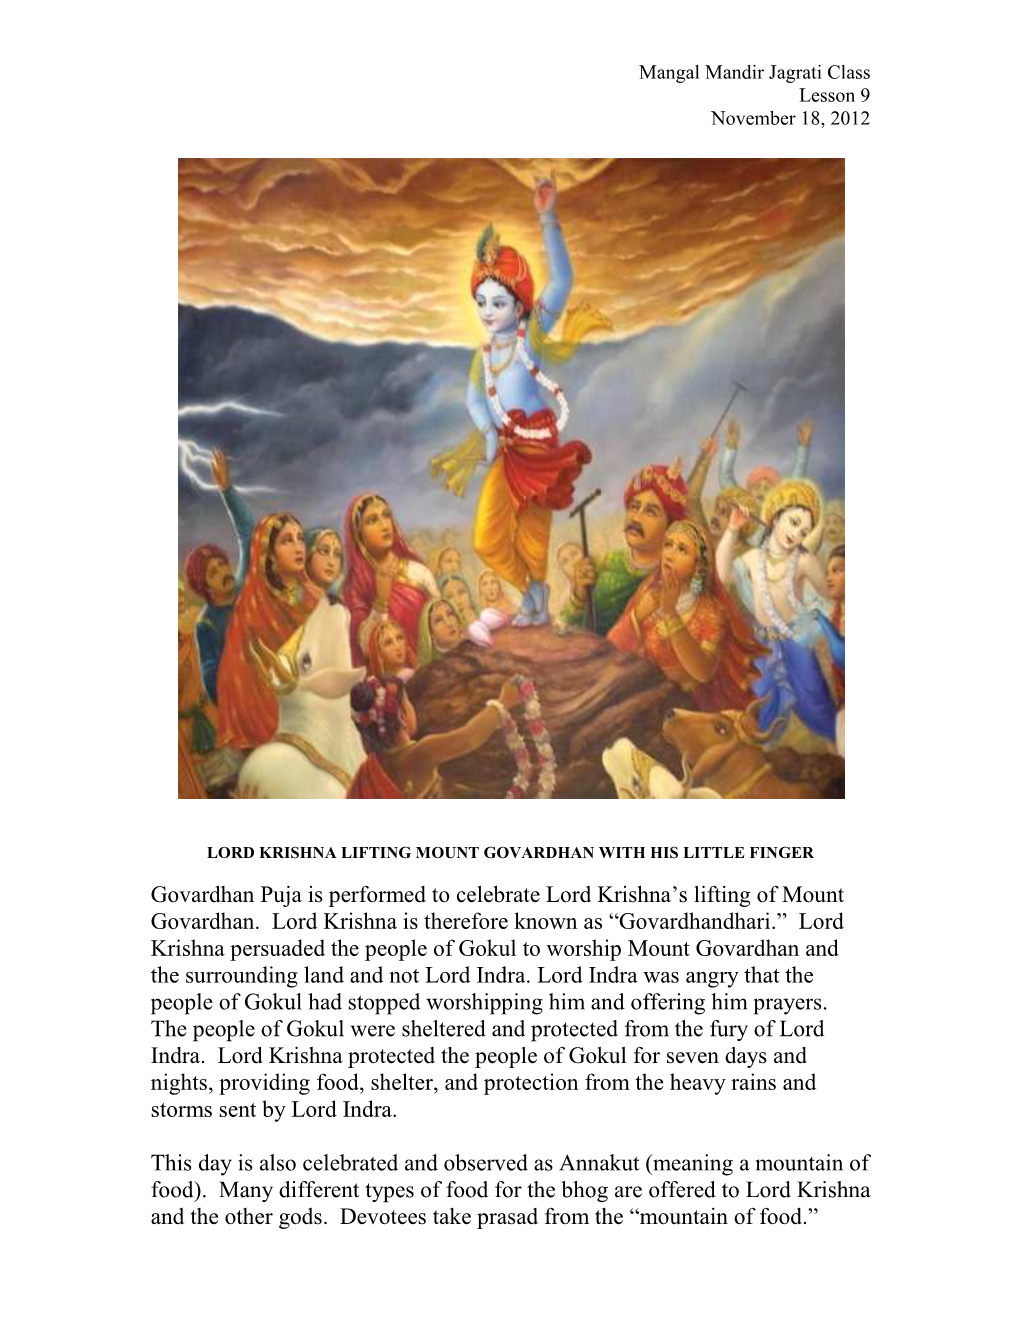 Govardhan Puja Is Performed to Celebrate Lord Krishna's Lifting Of